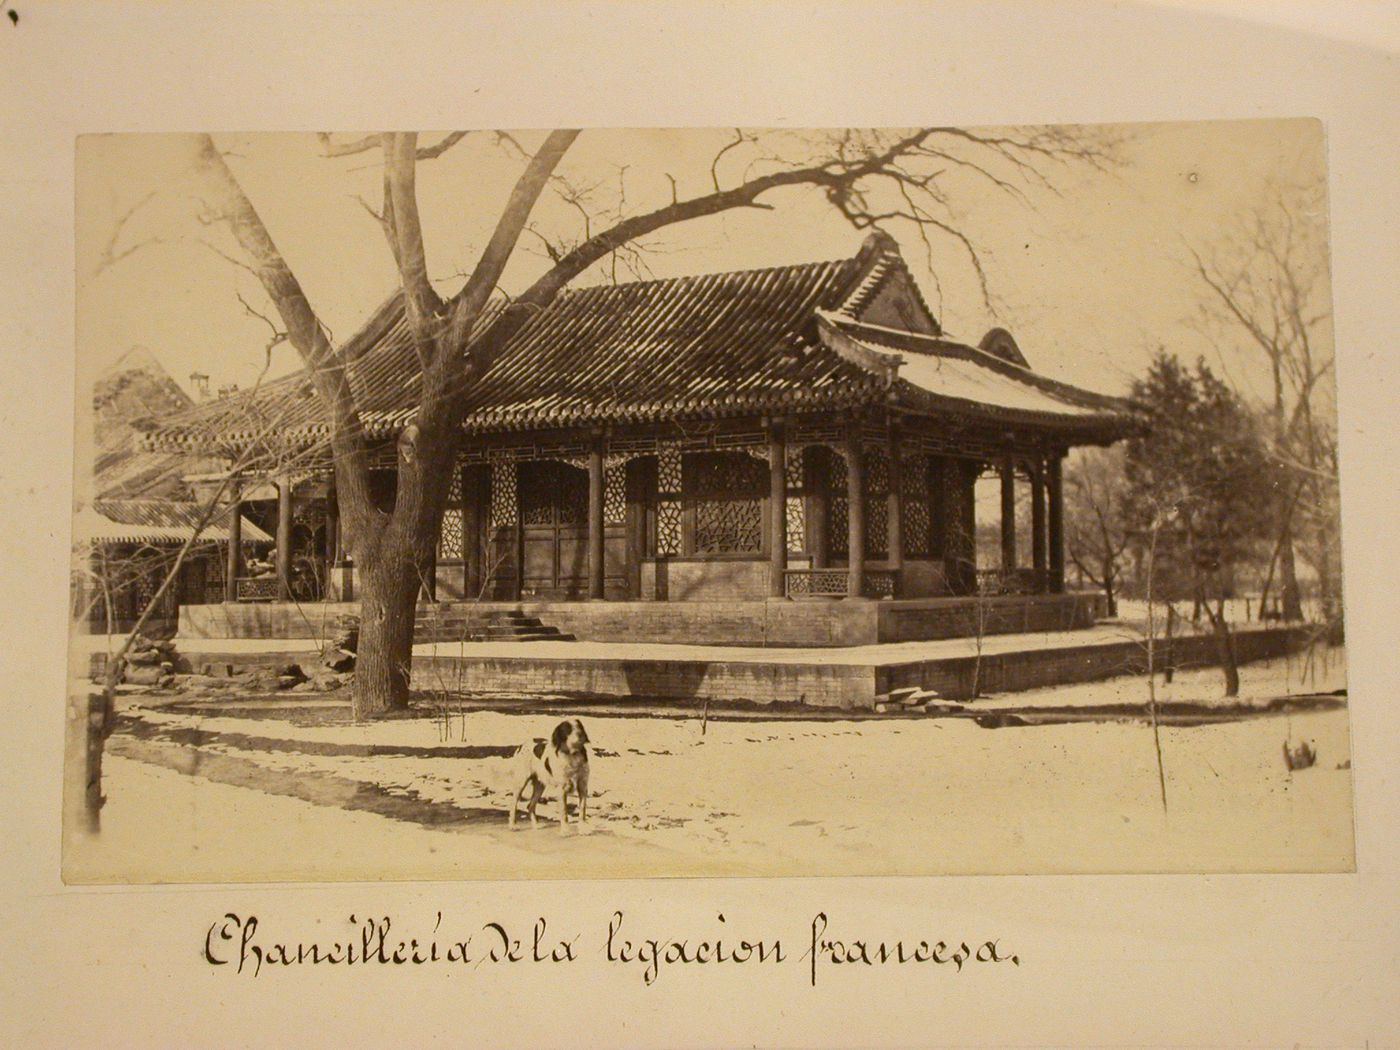 View of the chancellery in the French Legation, Peking (now Beijing), China